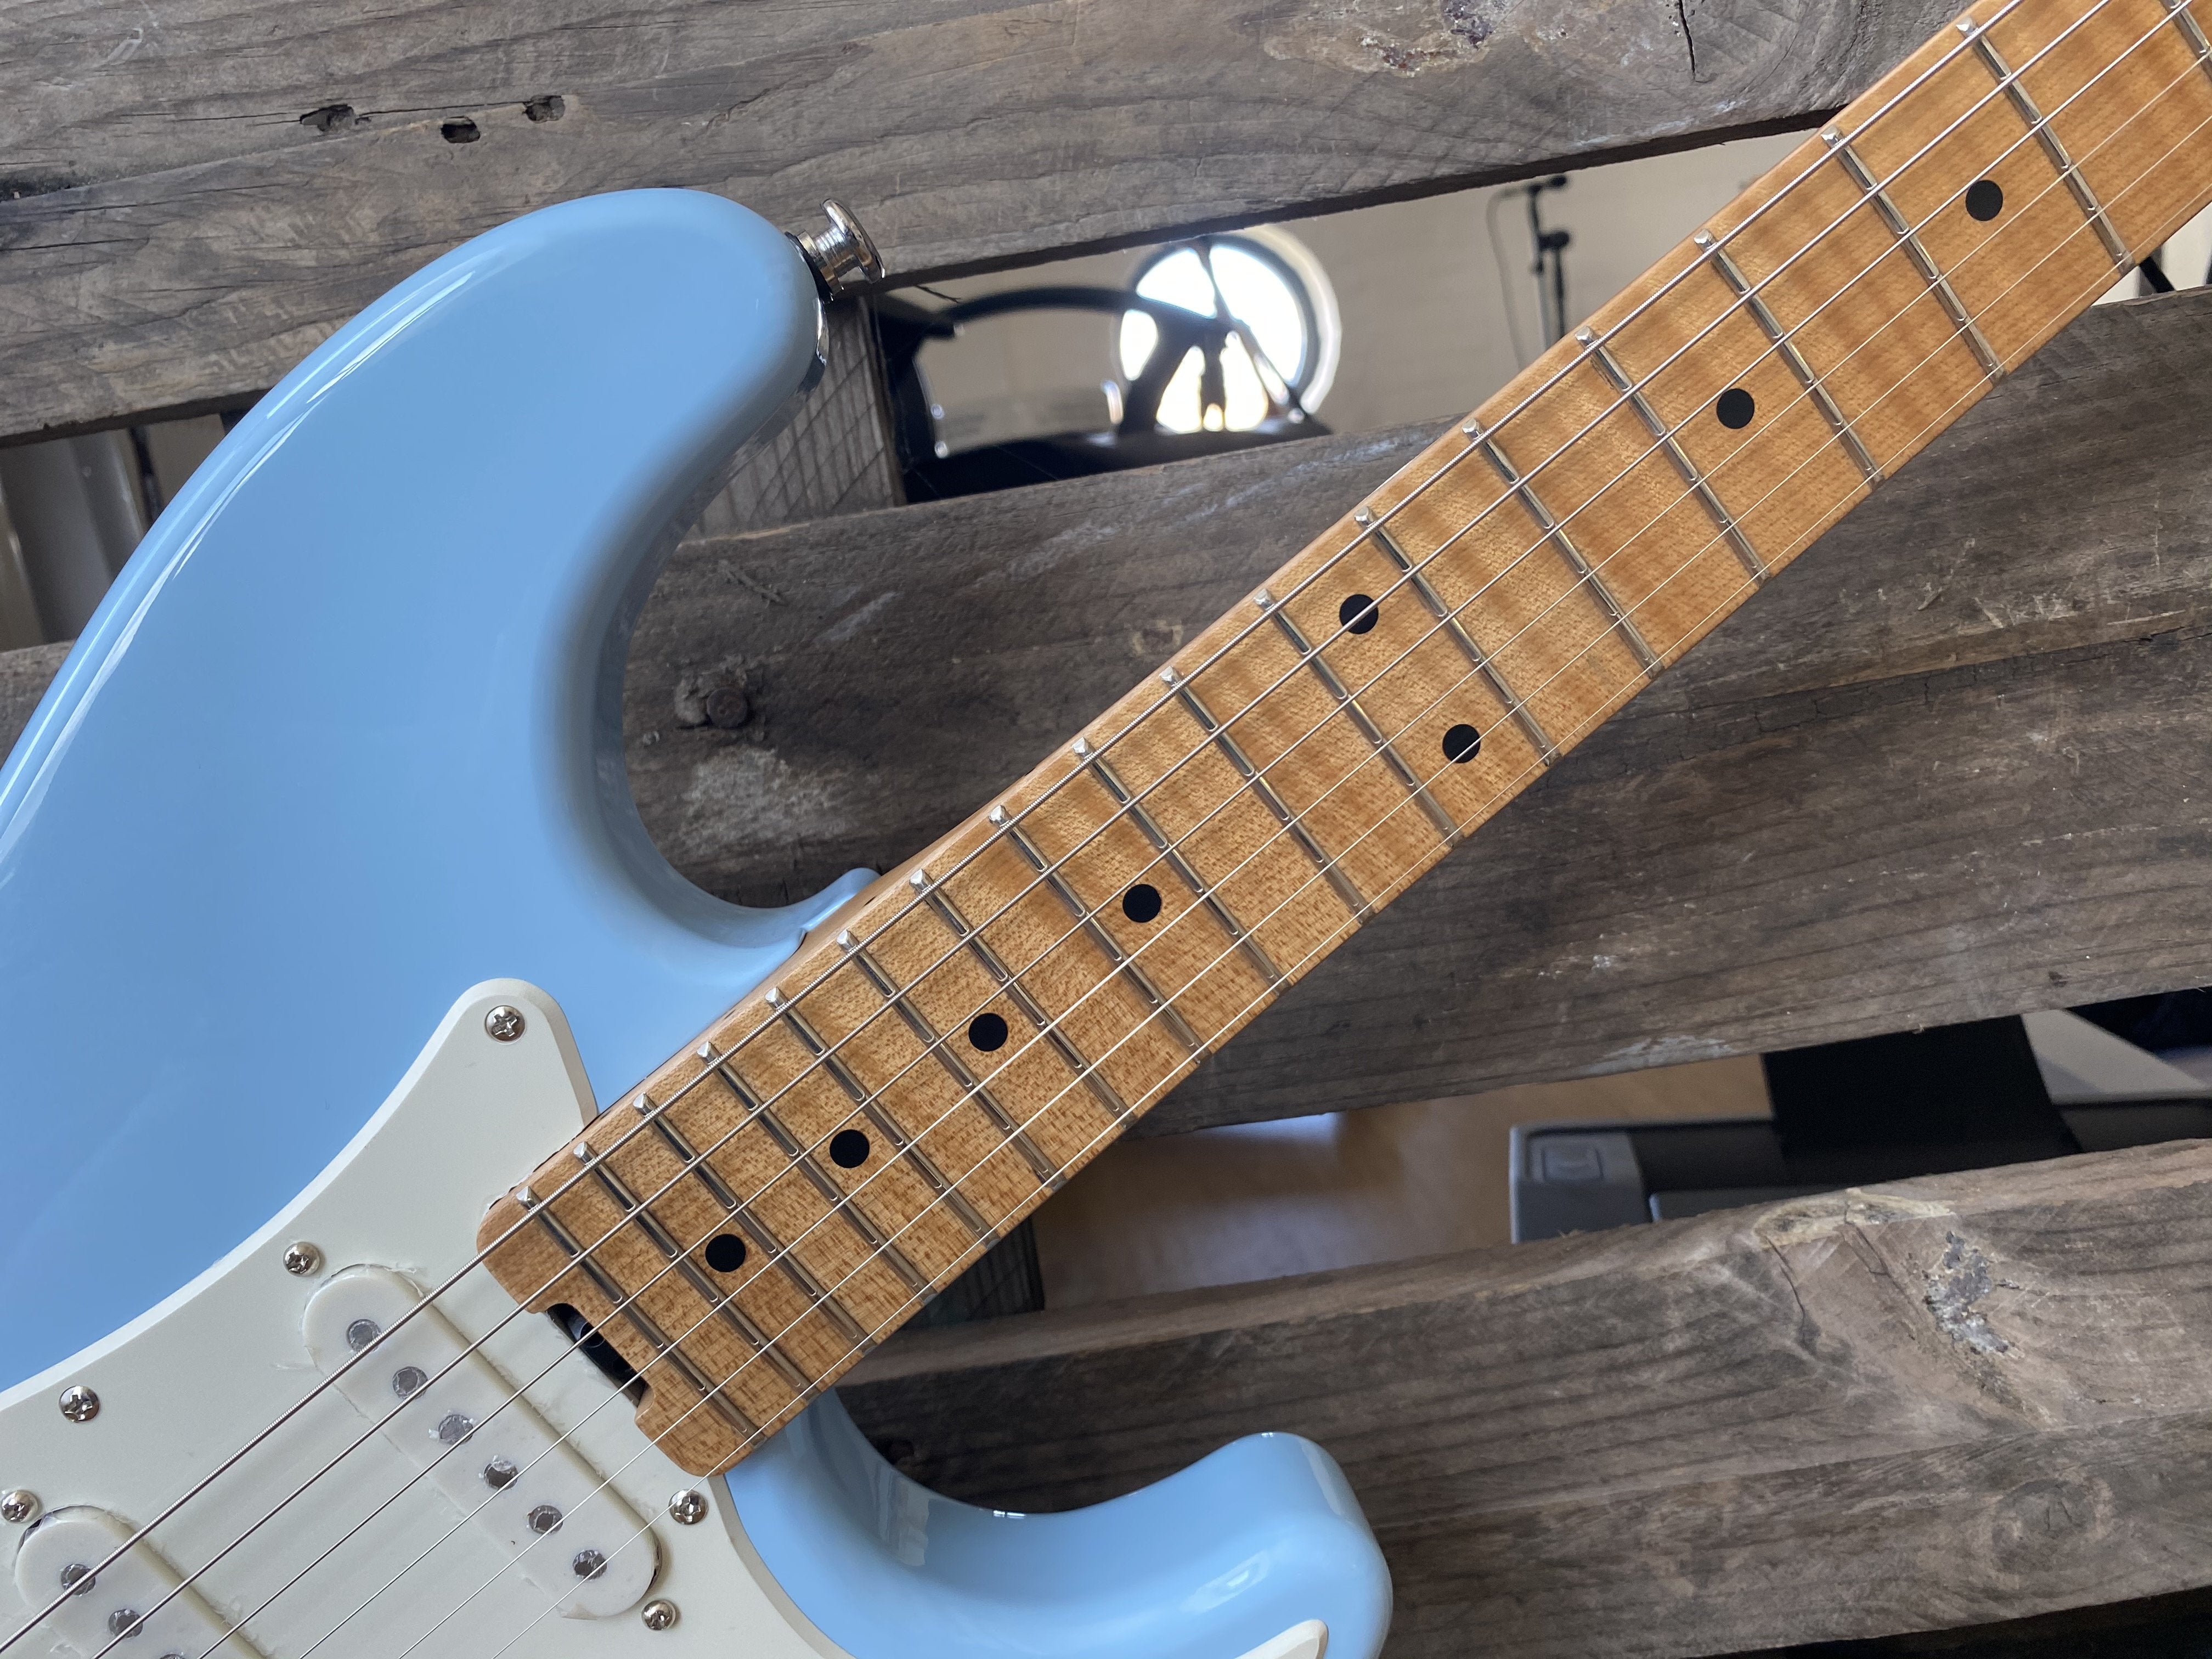 Gordon Smith Classic S Daphne Blue Rolled Flame Maple Neck Custom SN: 20254, Electric Guitar for sale at Richards Guitars.